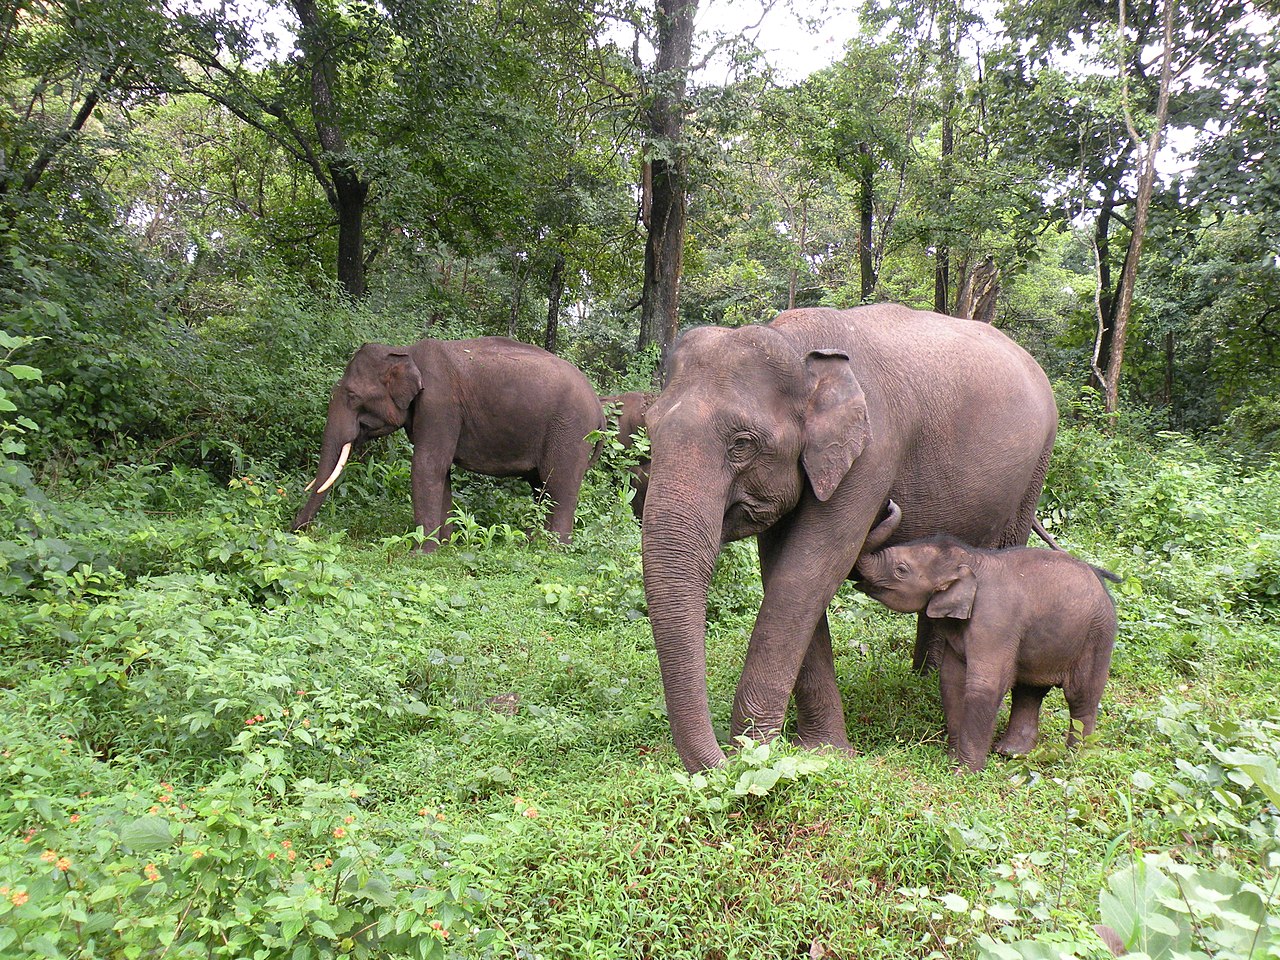 images/A_family_group_of_elephants_in_Mudumalai.jpg